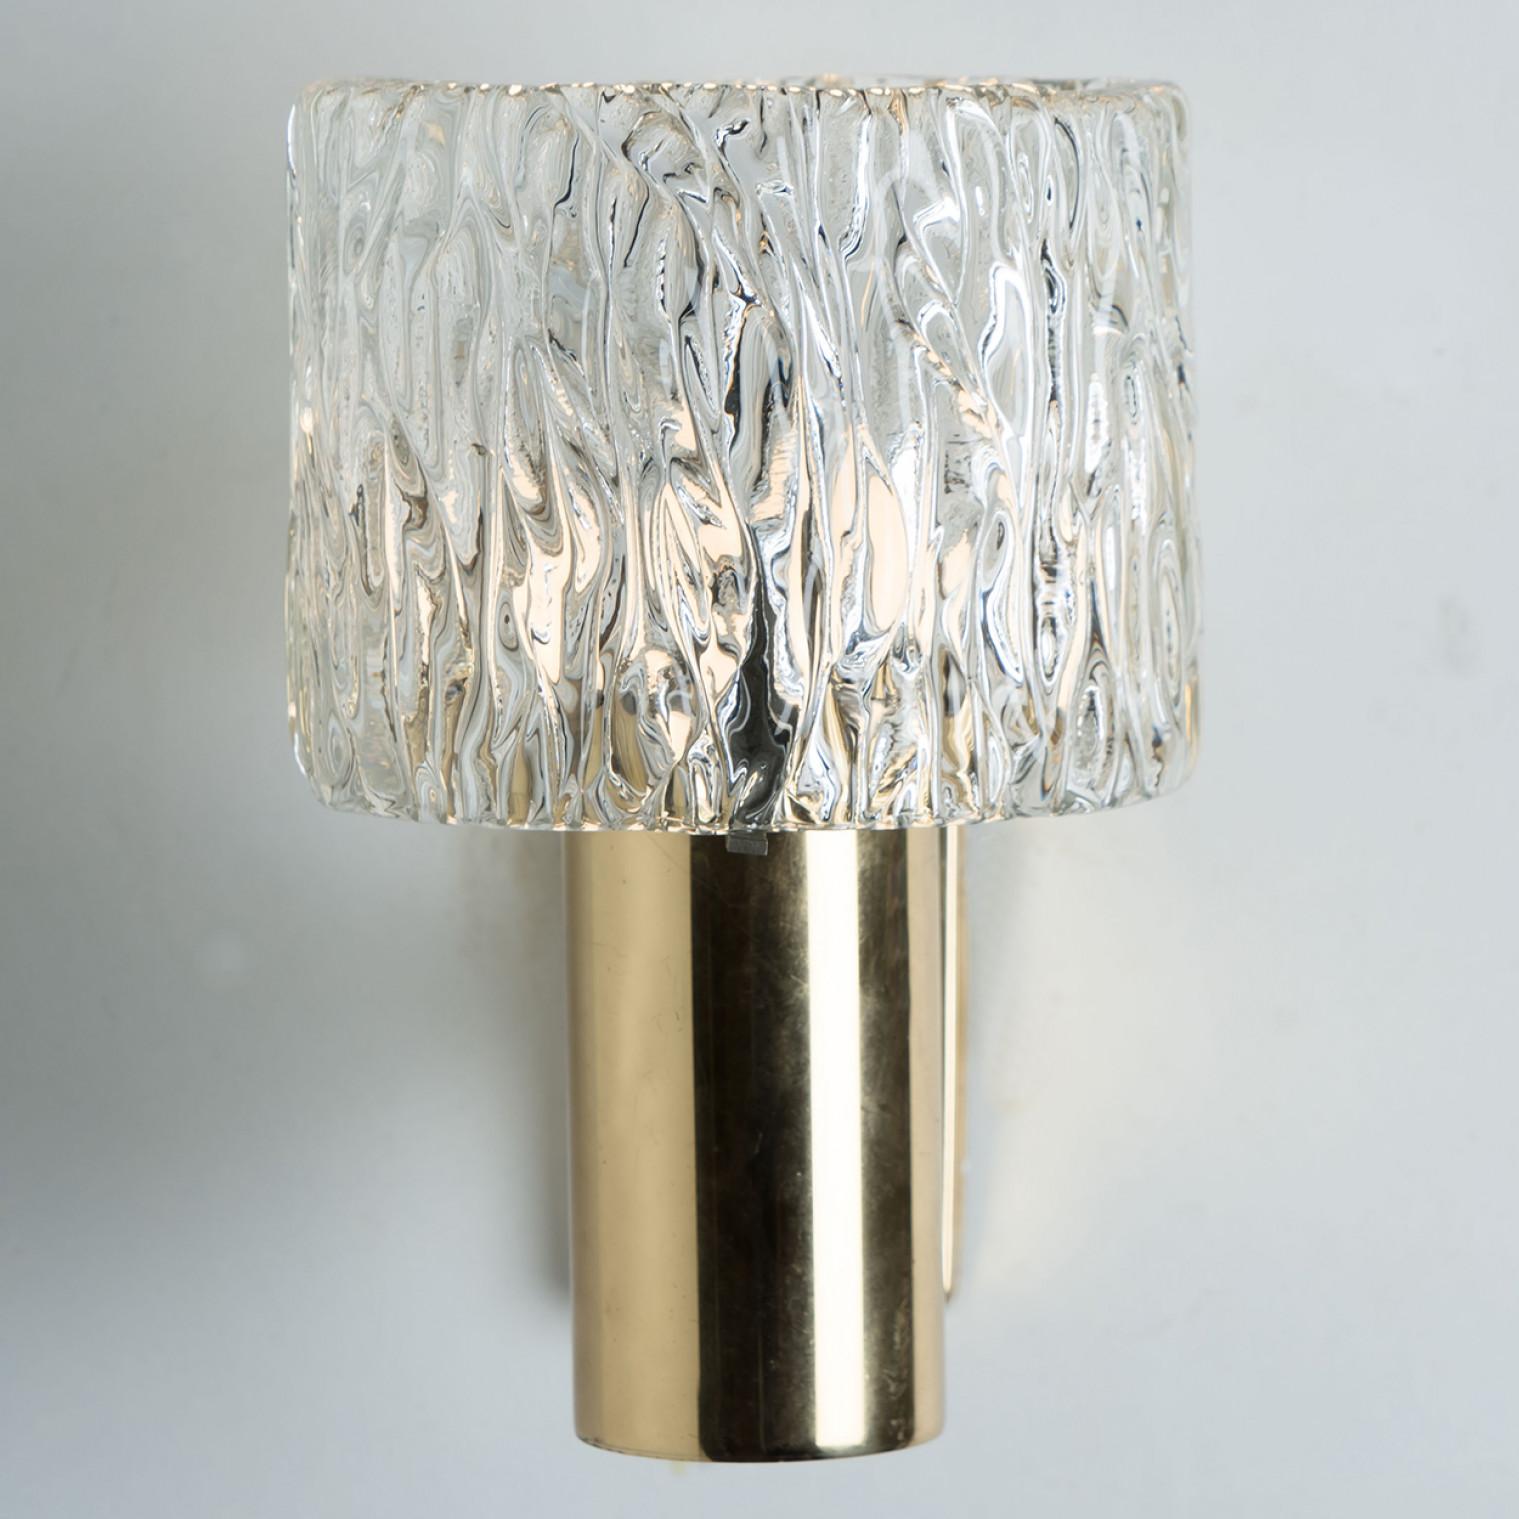 1 of the 2 Pairs of Glass Torch Wall Sconces by Fagerlund, 1960 For Sale 1